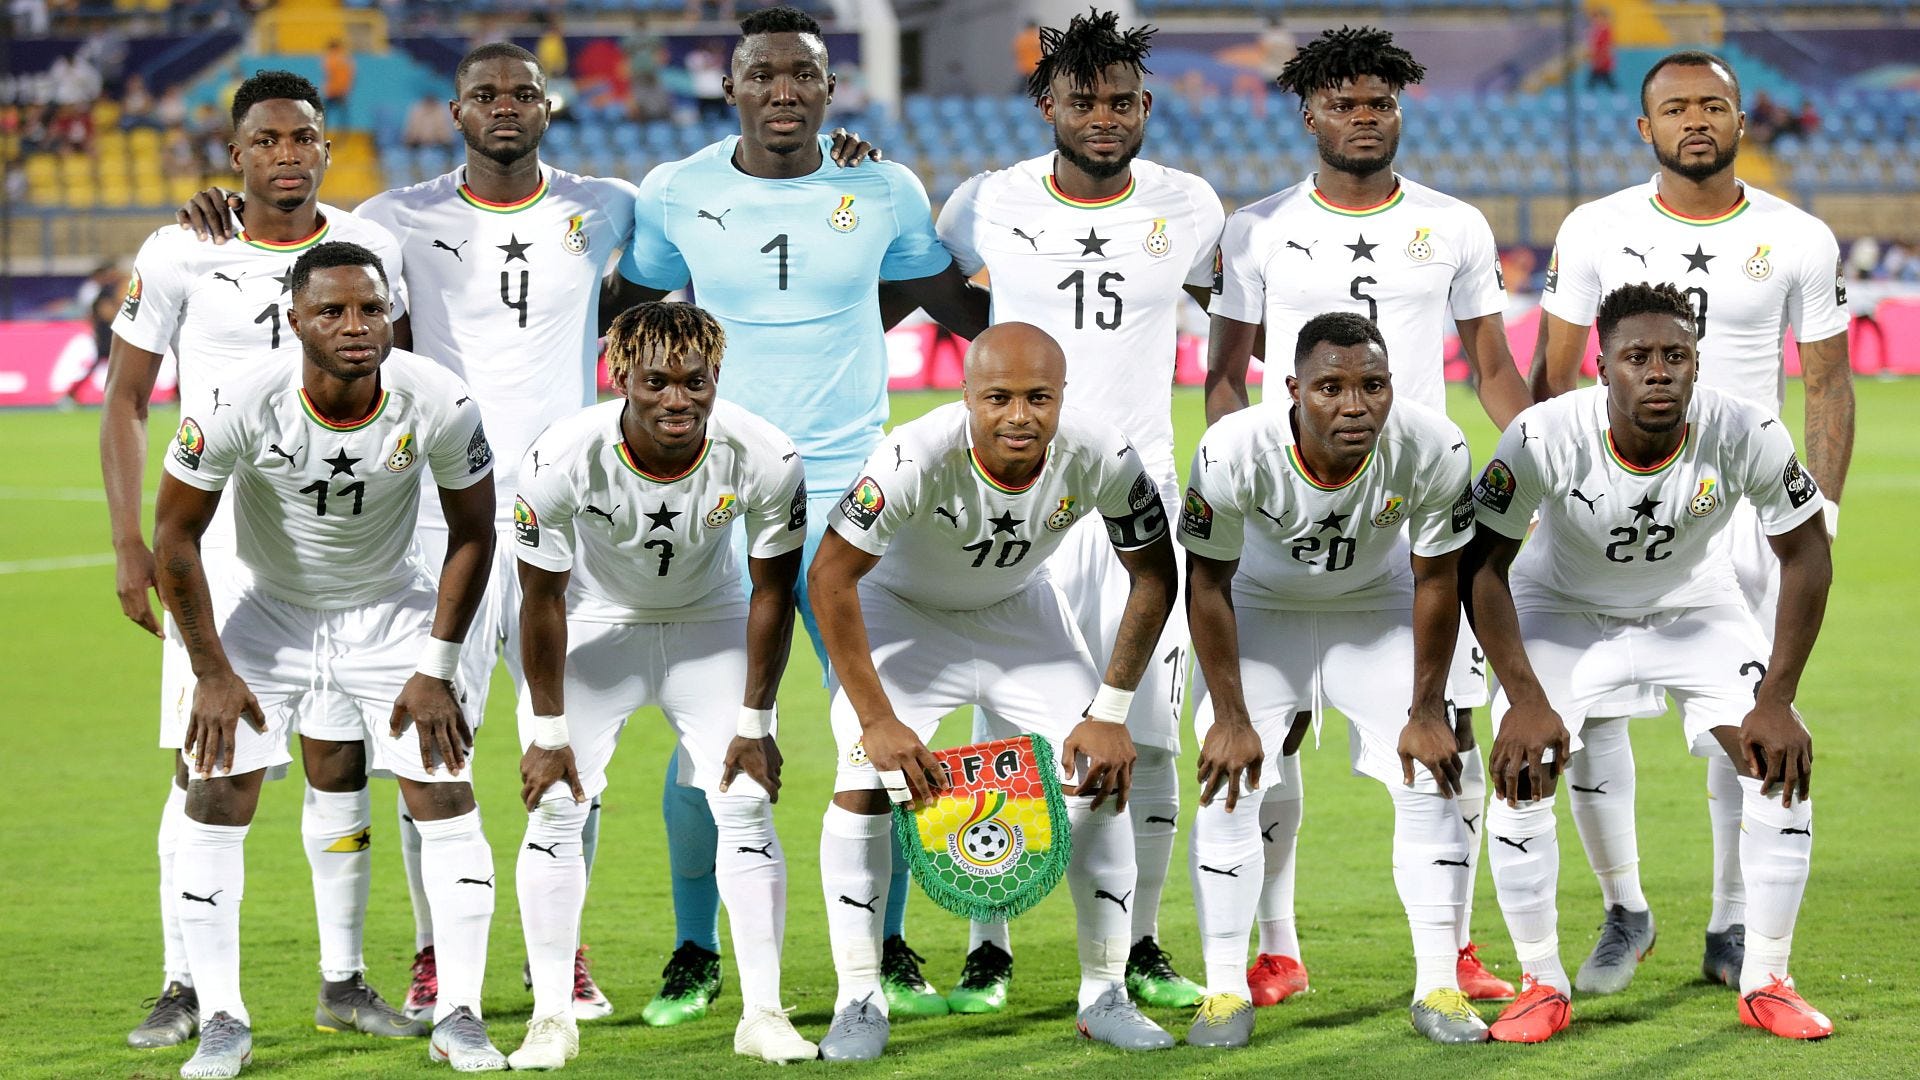 Ghana's new yellow generates buzz as Puma reveals 202021 kits for Cote